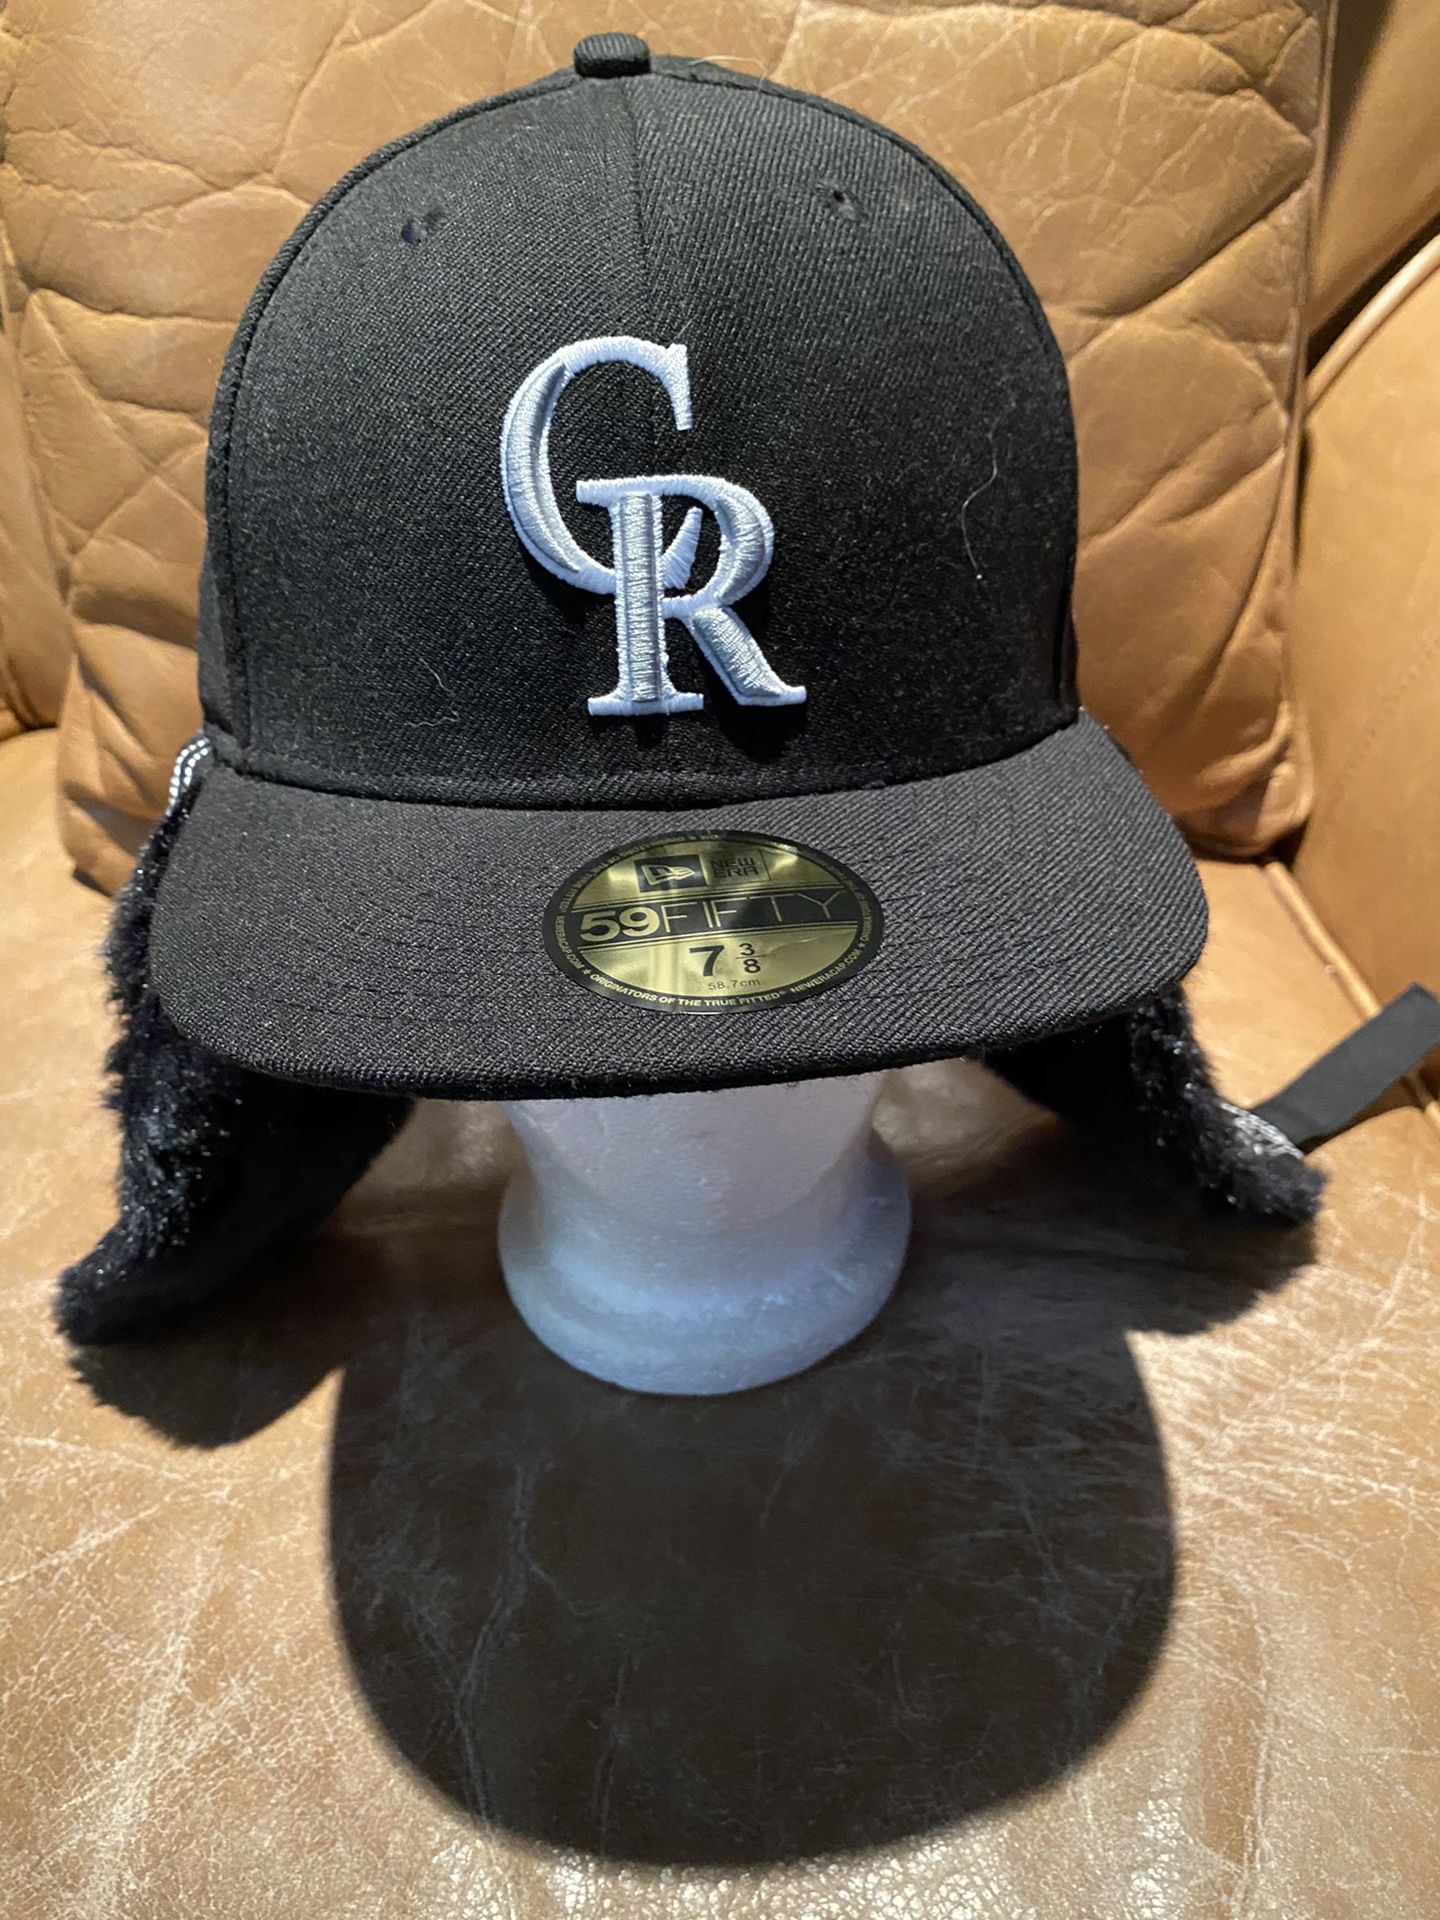 New MBL Colorado Rockies Dog Chain Style Hat Size 7 3/8